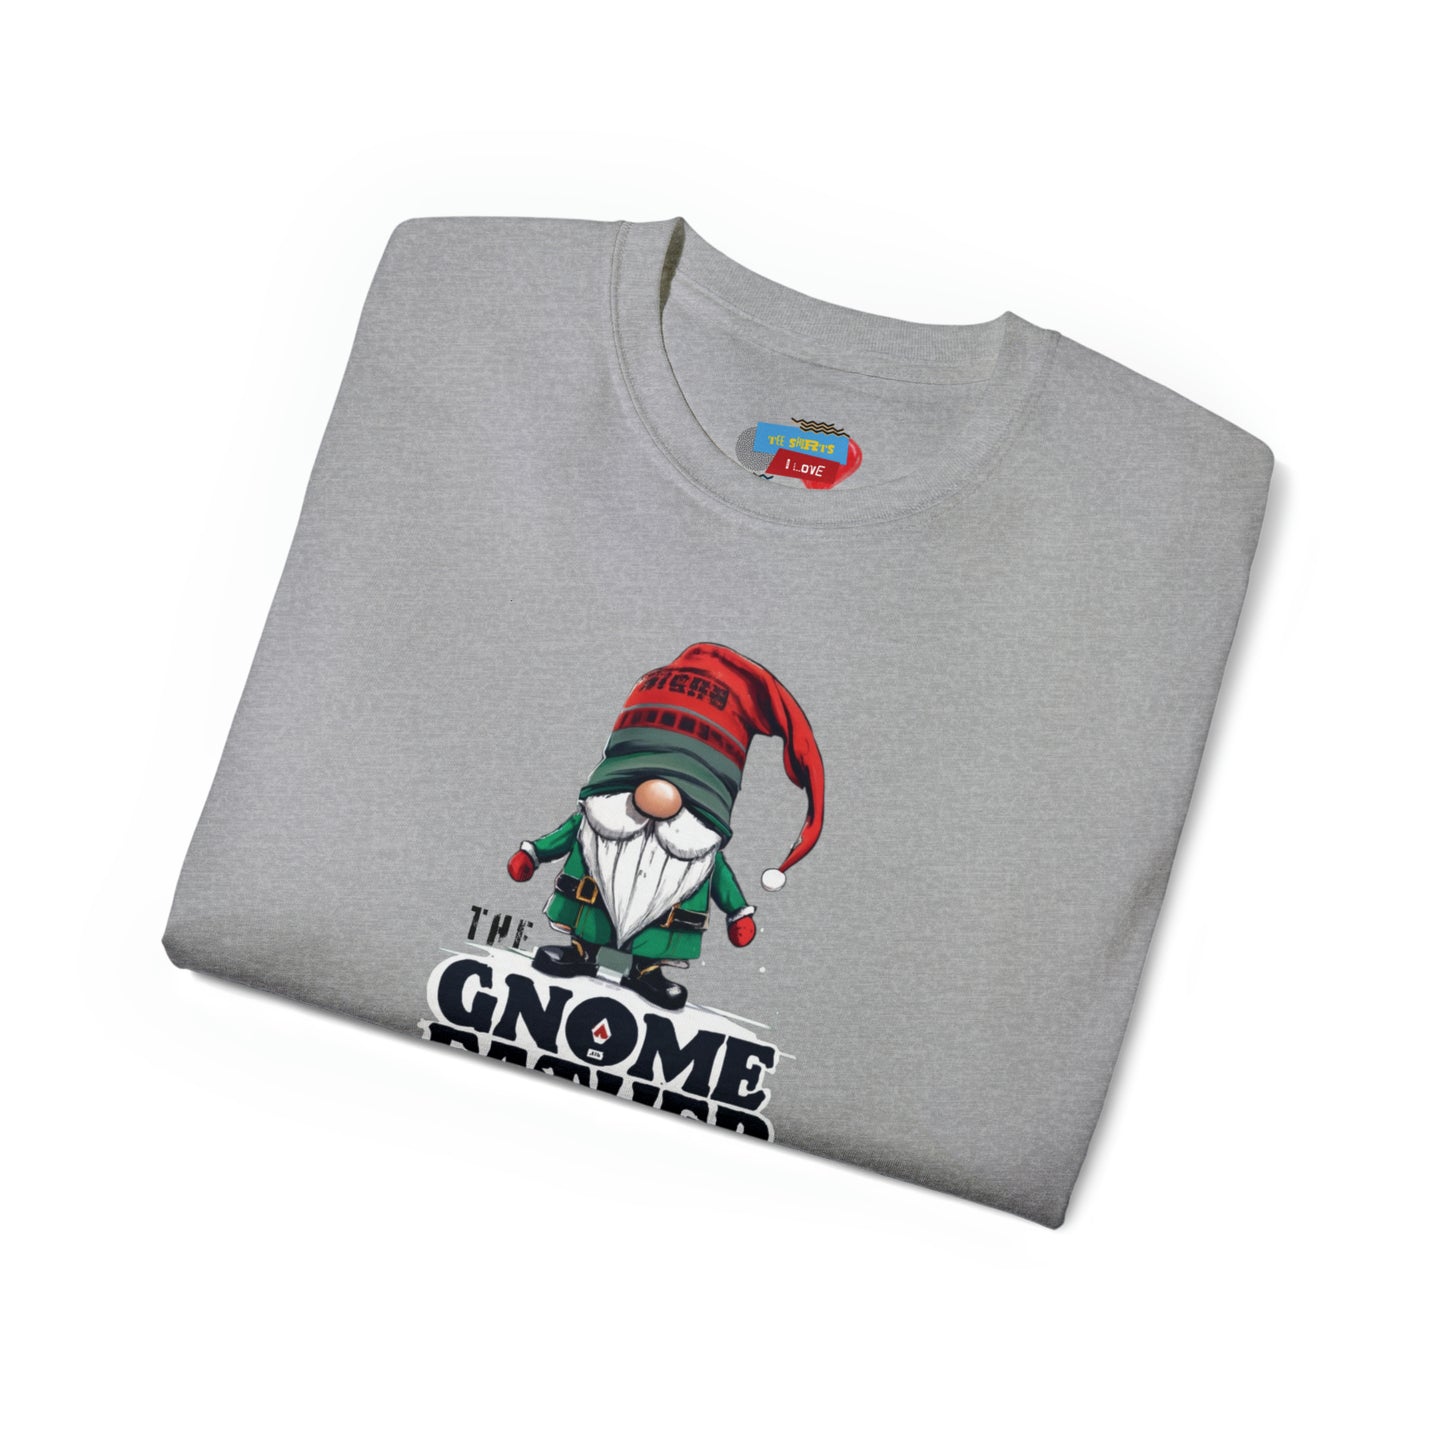 The Gnome Father 3 Collection Cotton Tee